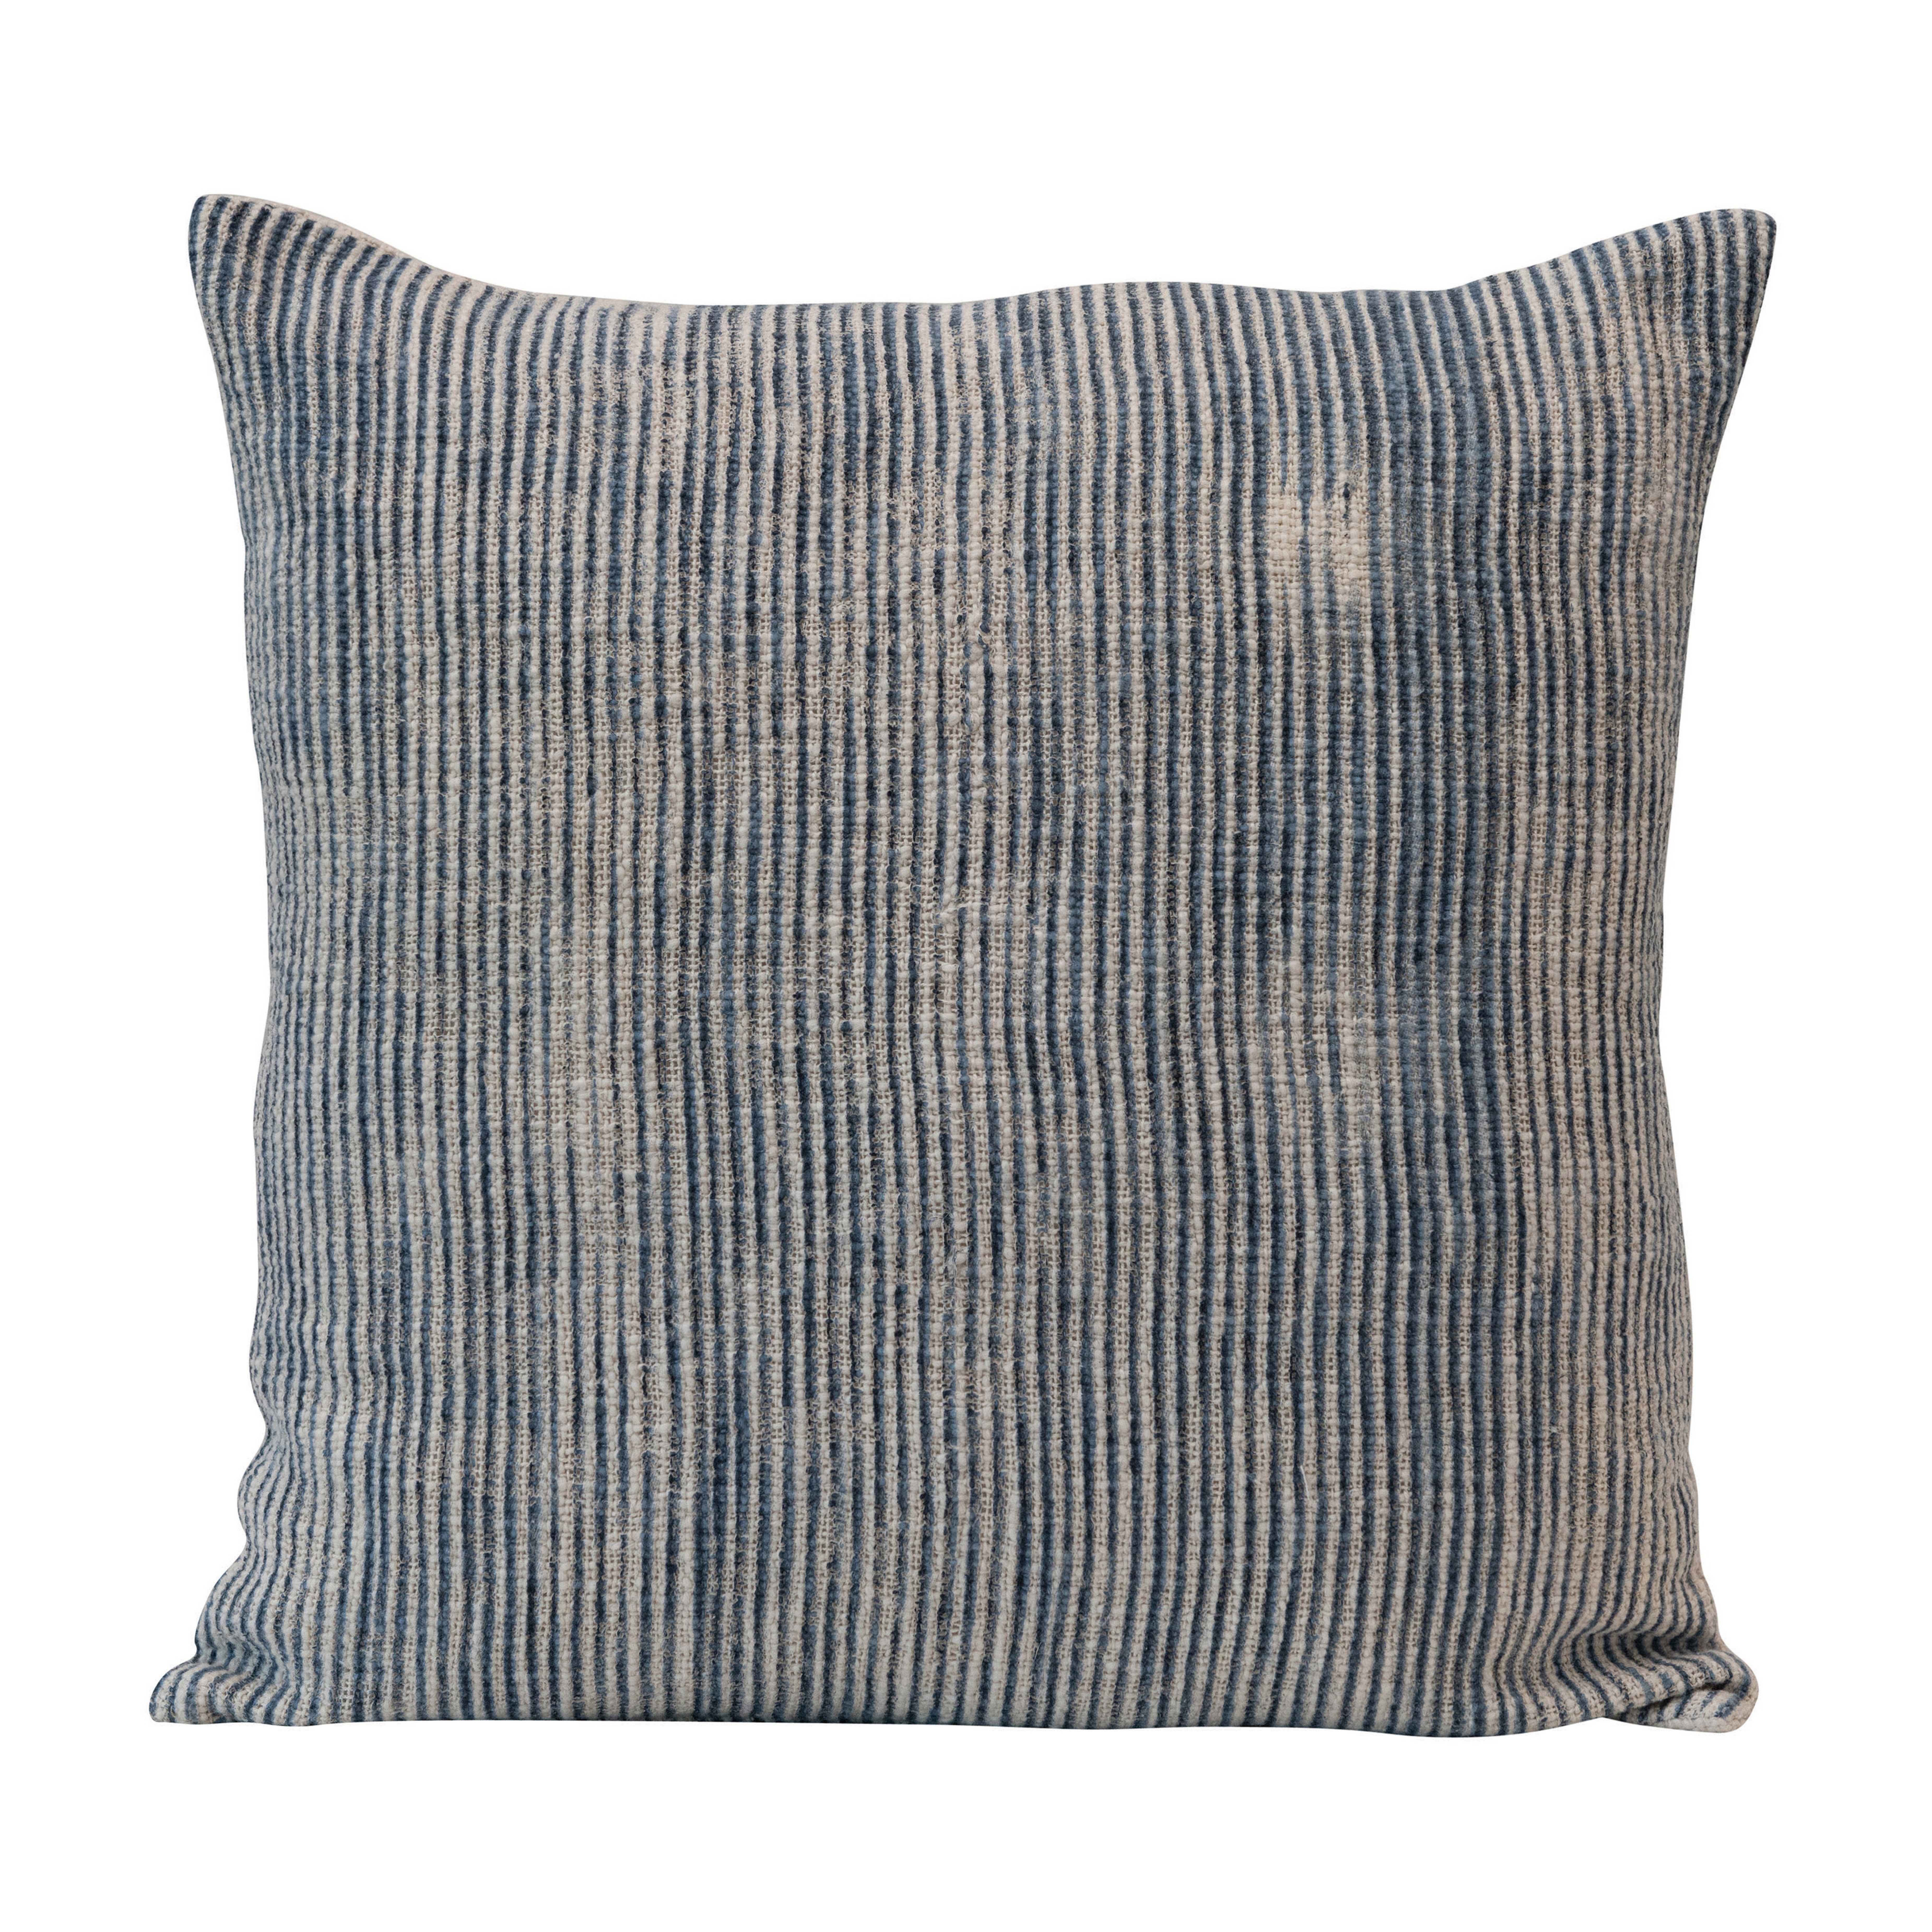 Stonewashed Woven Cotton Blend Slub Pillow with Stripes, Blue & Cream Color - Nomad Home